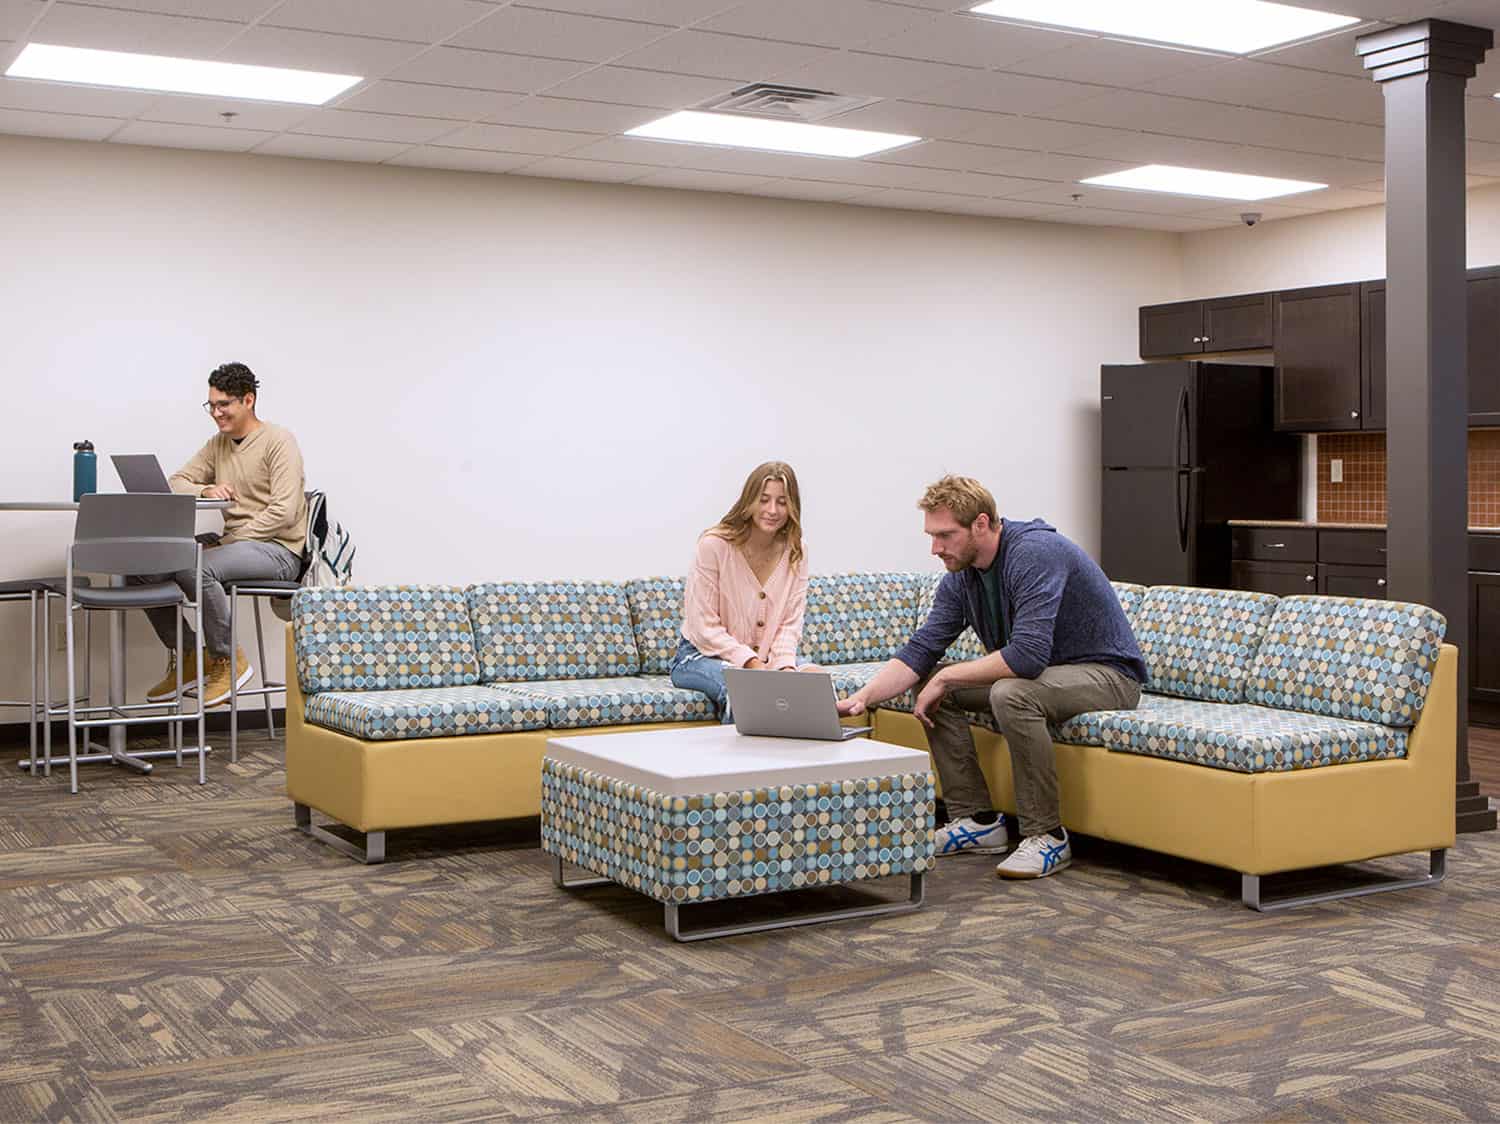 Students in lounge area studying on Rally Modular Seating and at a Tubular Table with Upland Metal Bar Stools..